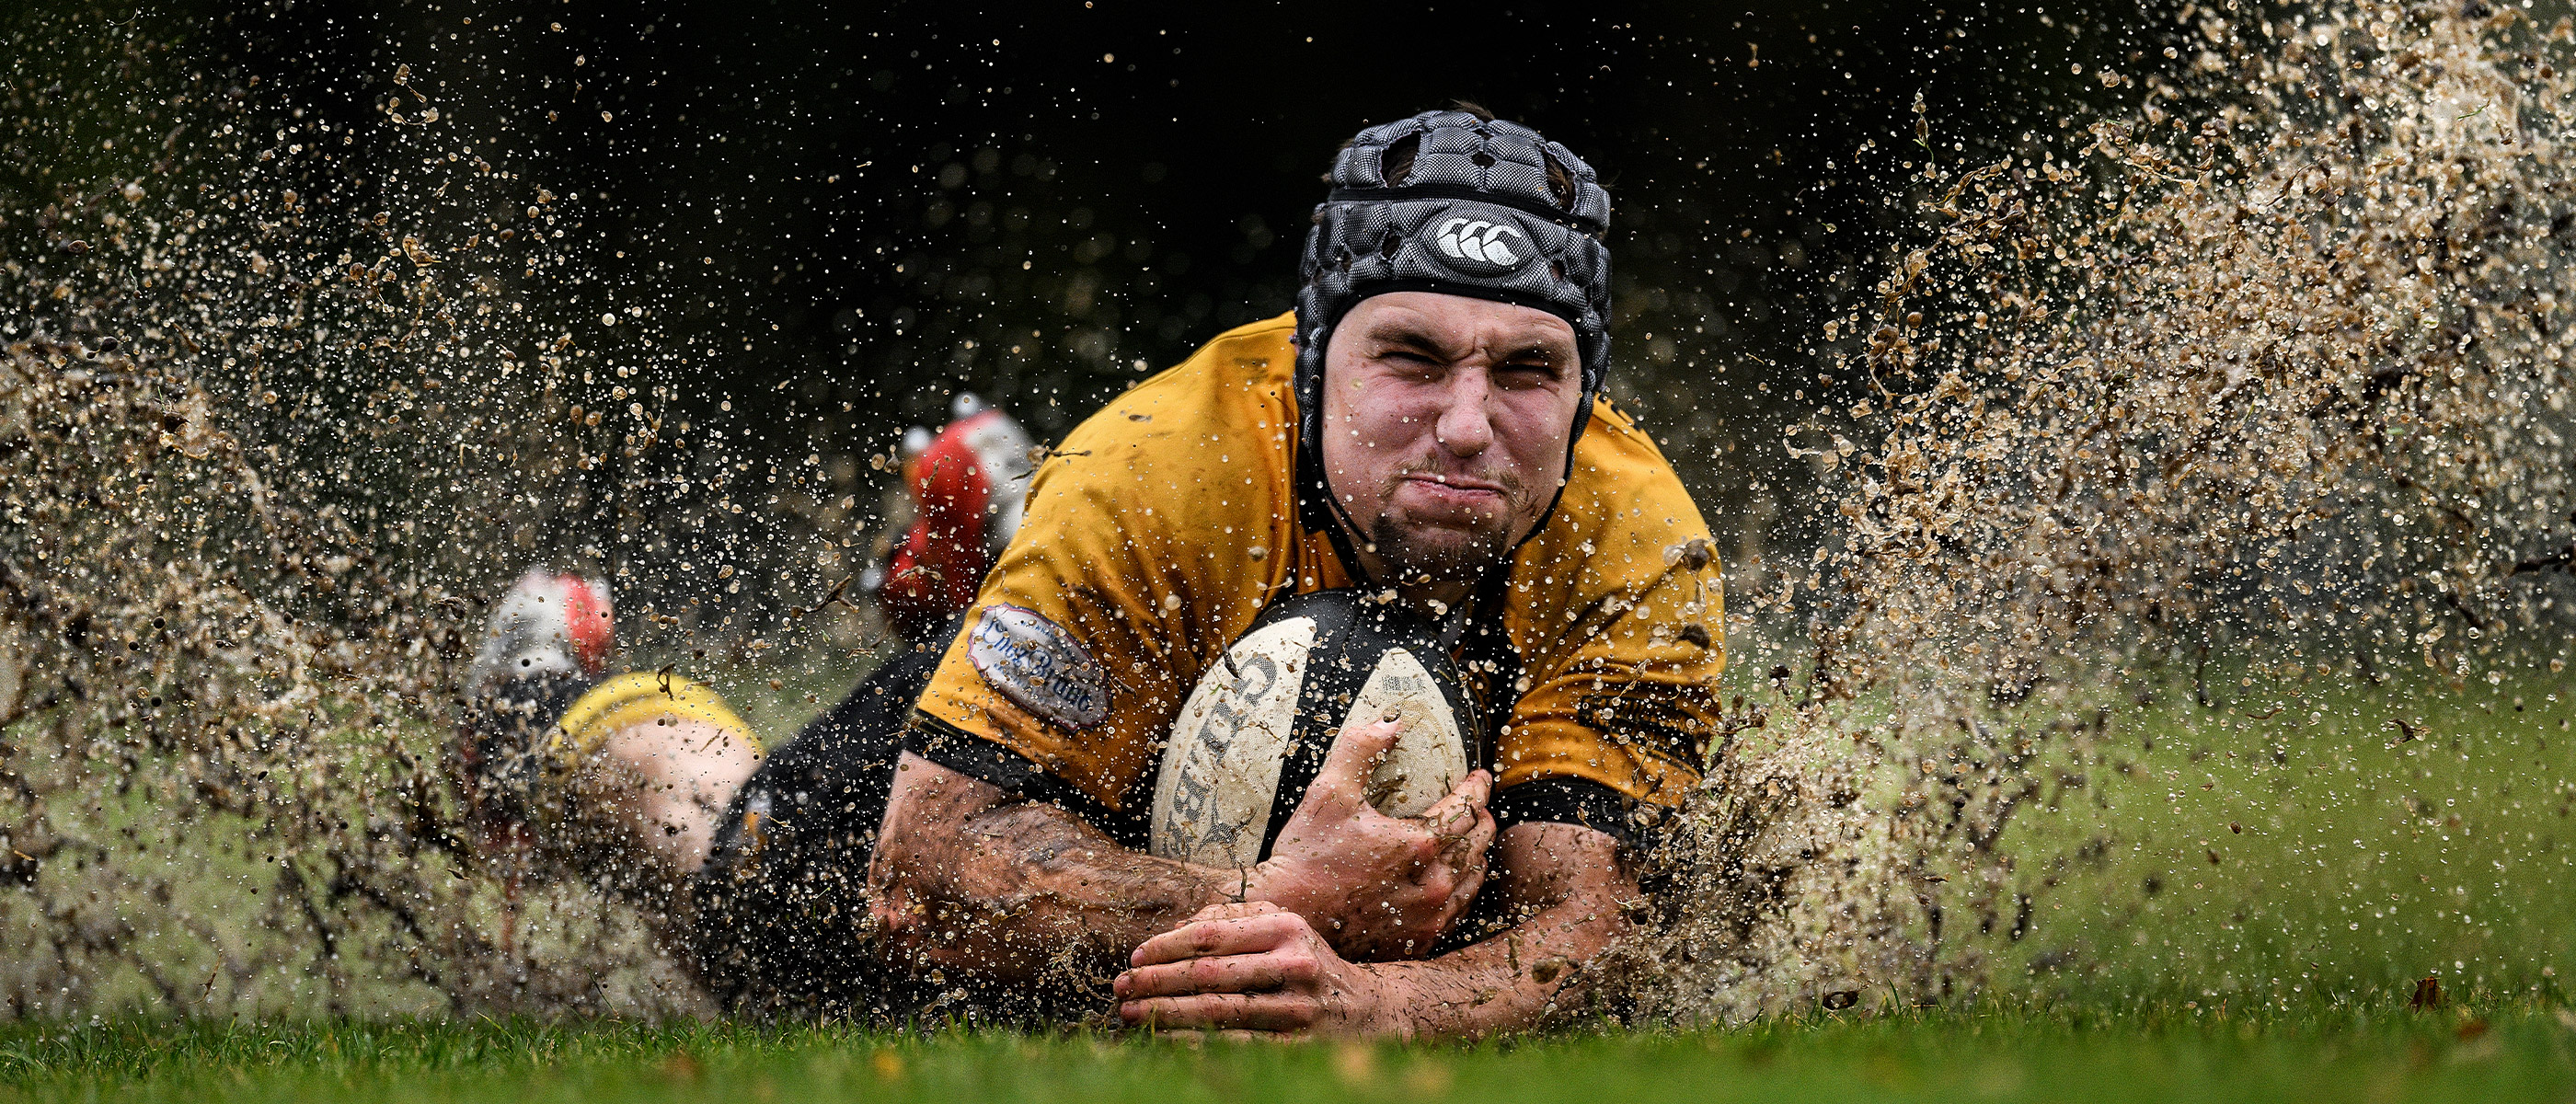 Photo of a rugby player in the mud with the ball, taken with the NIKKOR Z 400mm f/2.8 TC VR S lens